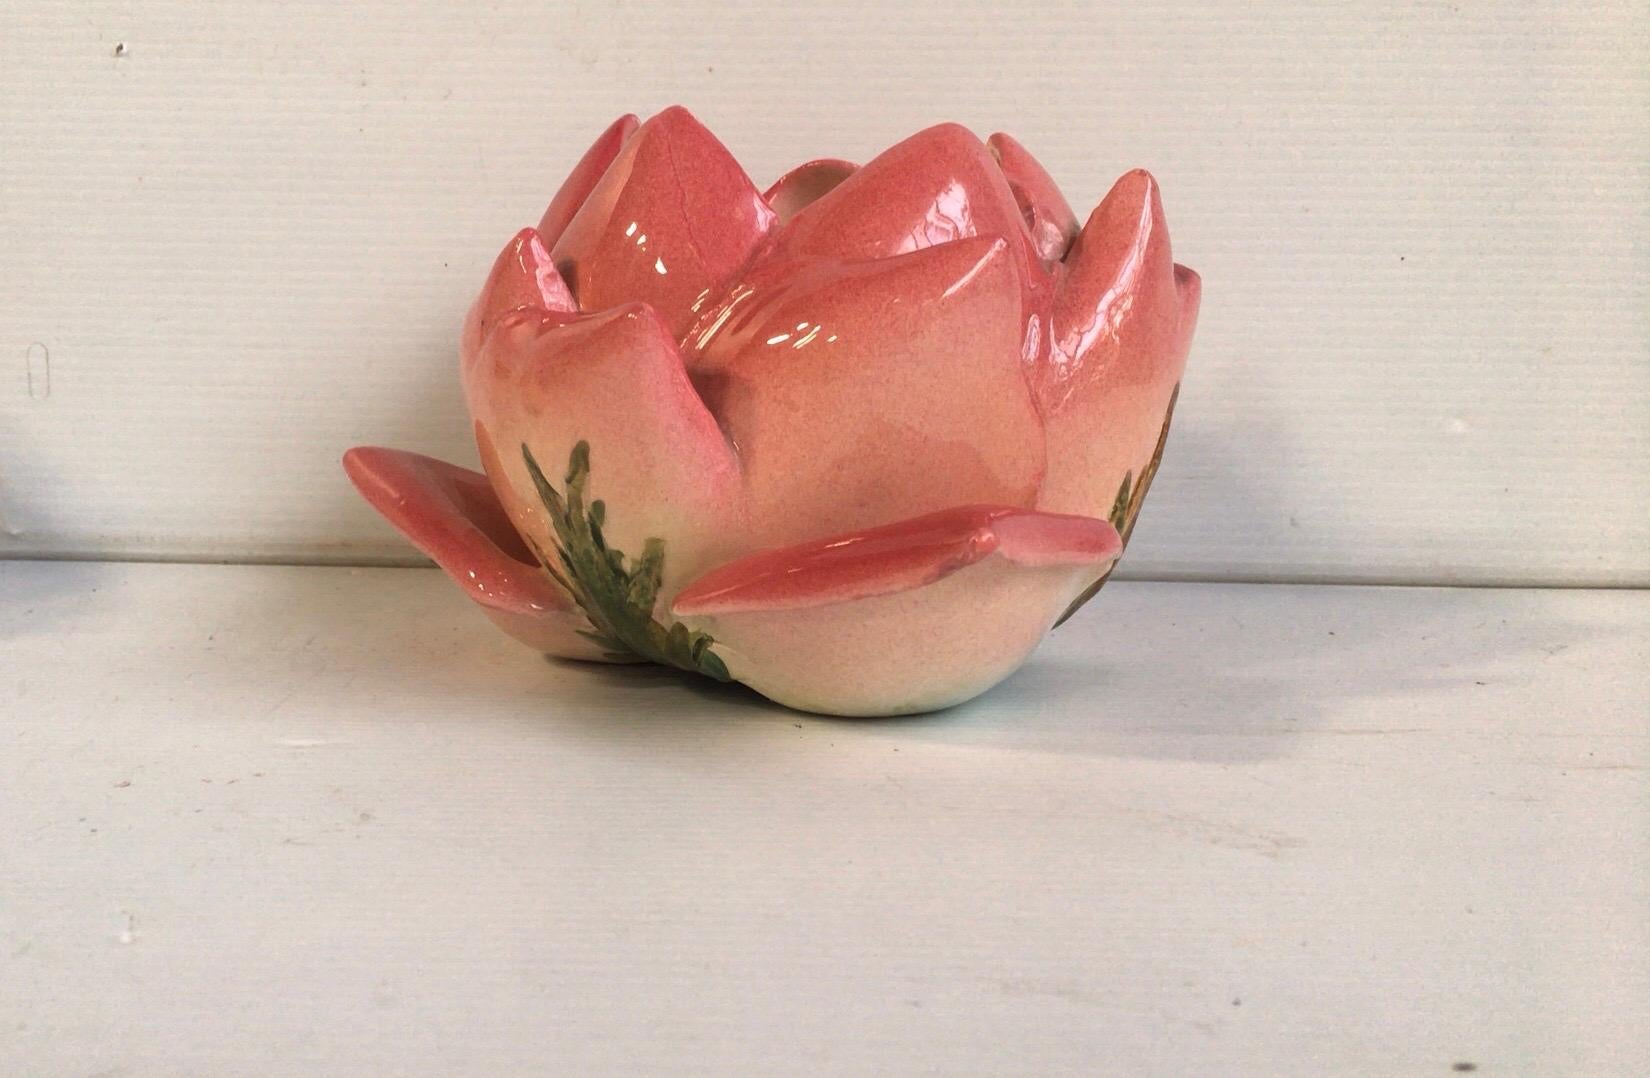 Rare French Majolica pink rose cache pot jardinière Delphin Massier, circa 1880.
The Massier family are known for the quality of their unique enamels and paintings. They produced an incredible whole range of flowers like iris, roses, daisies, wild